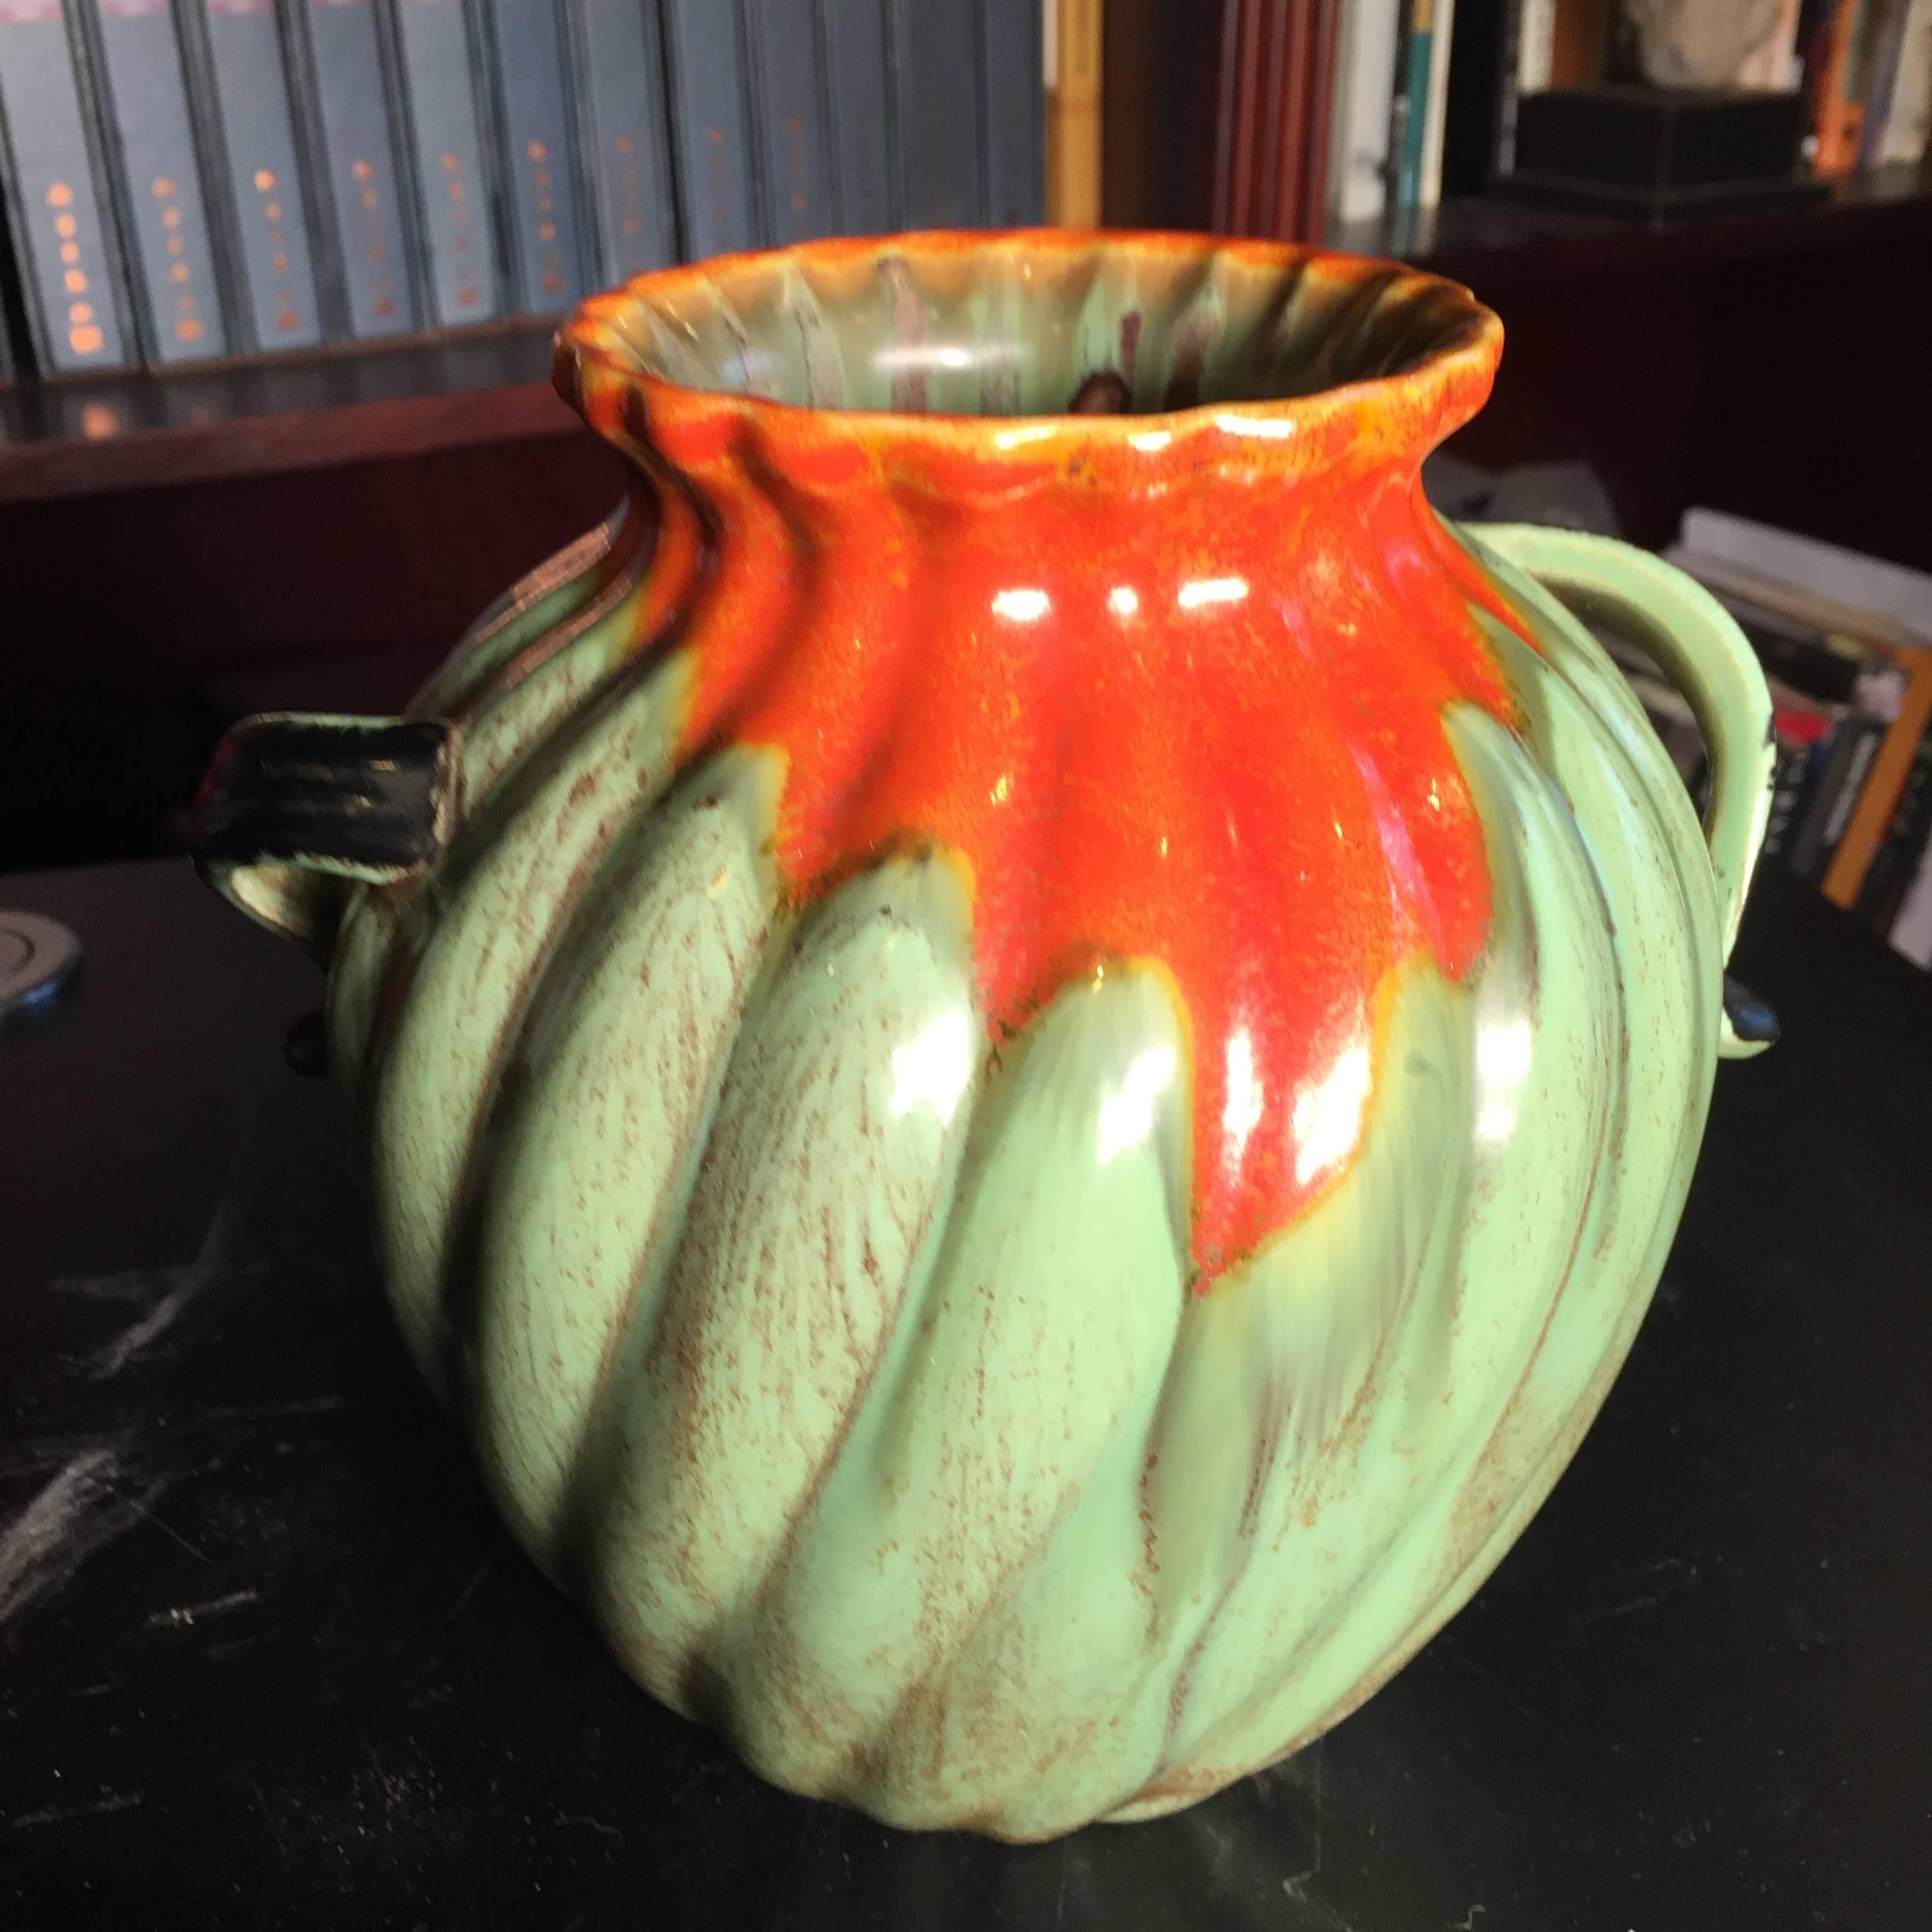 Mid-Century Modern Sweet Antique Two Handled Pot in Organic Green and Tomato Red Colors, 1960